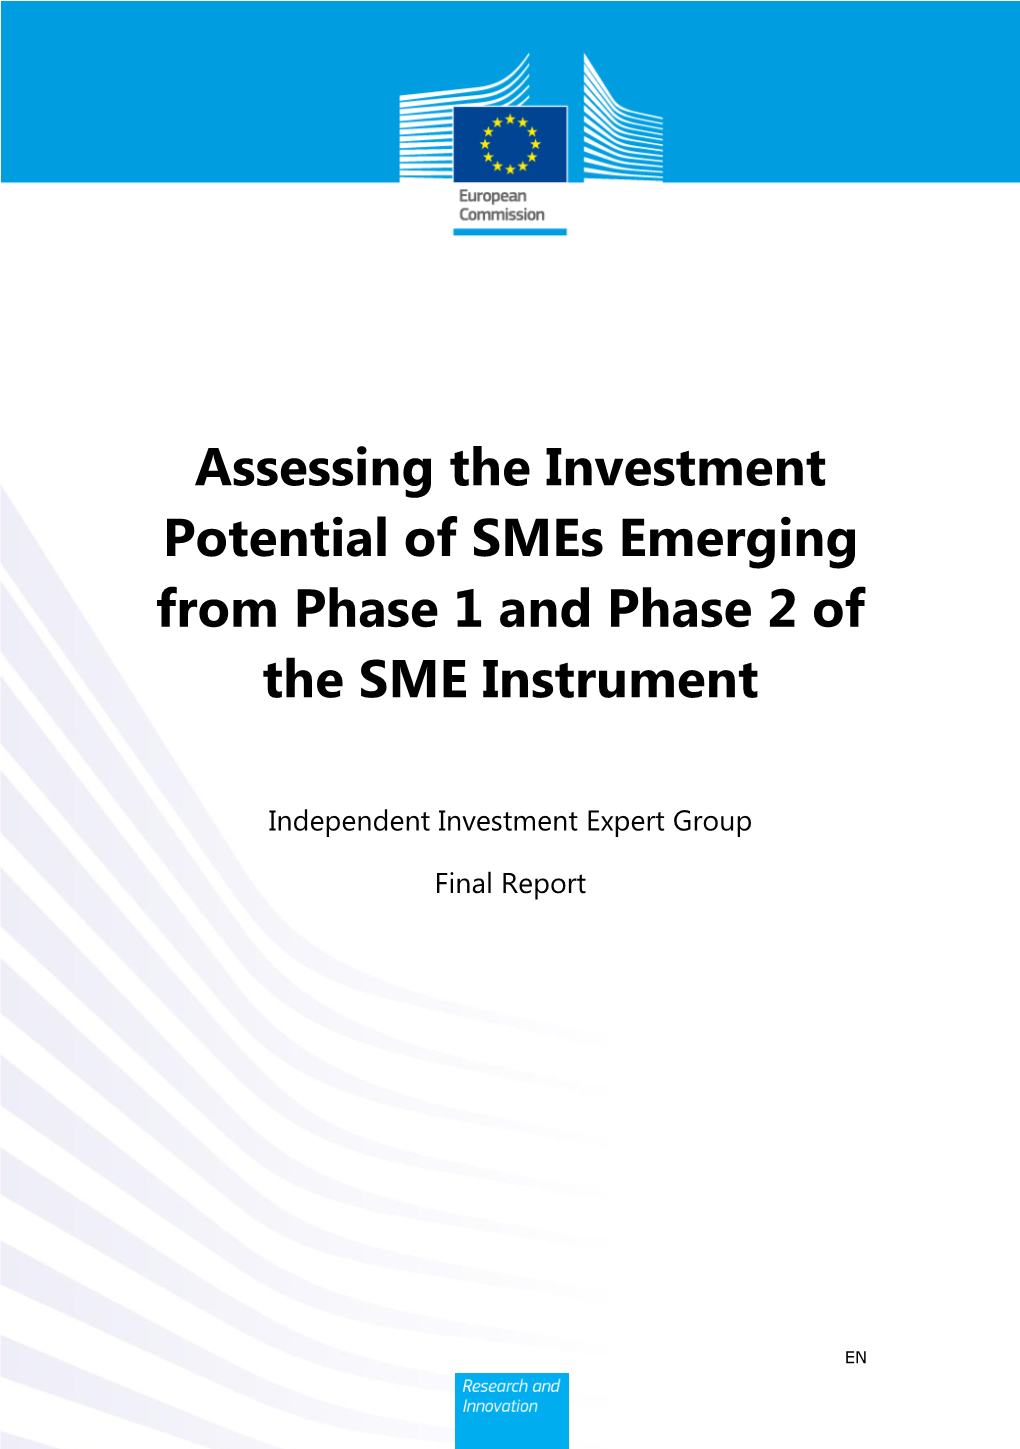 Assessing the Investment Potential of Smes Emerging from Phase 1 and Phase 2 of the SME Instrument